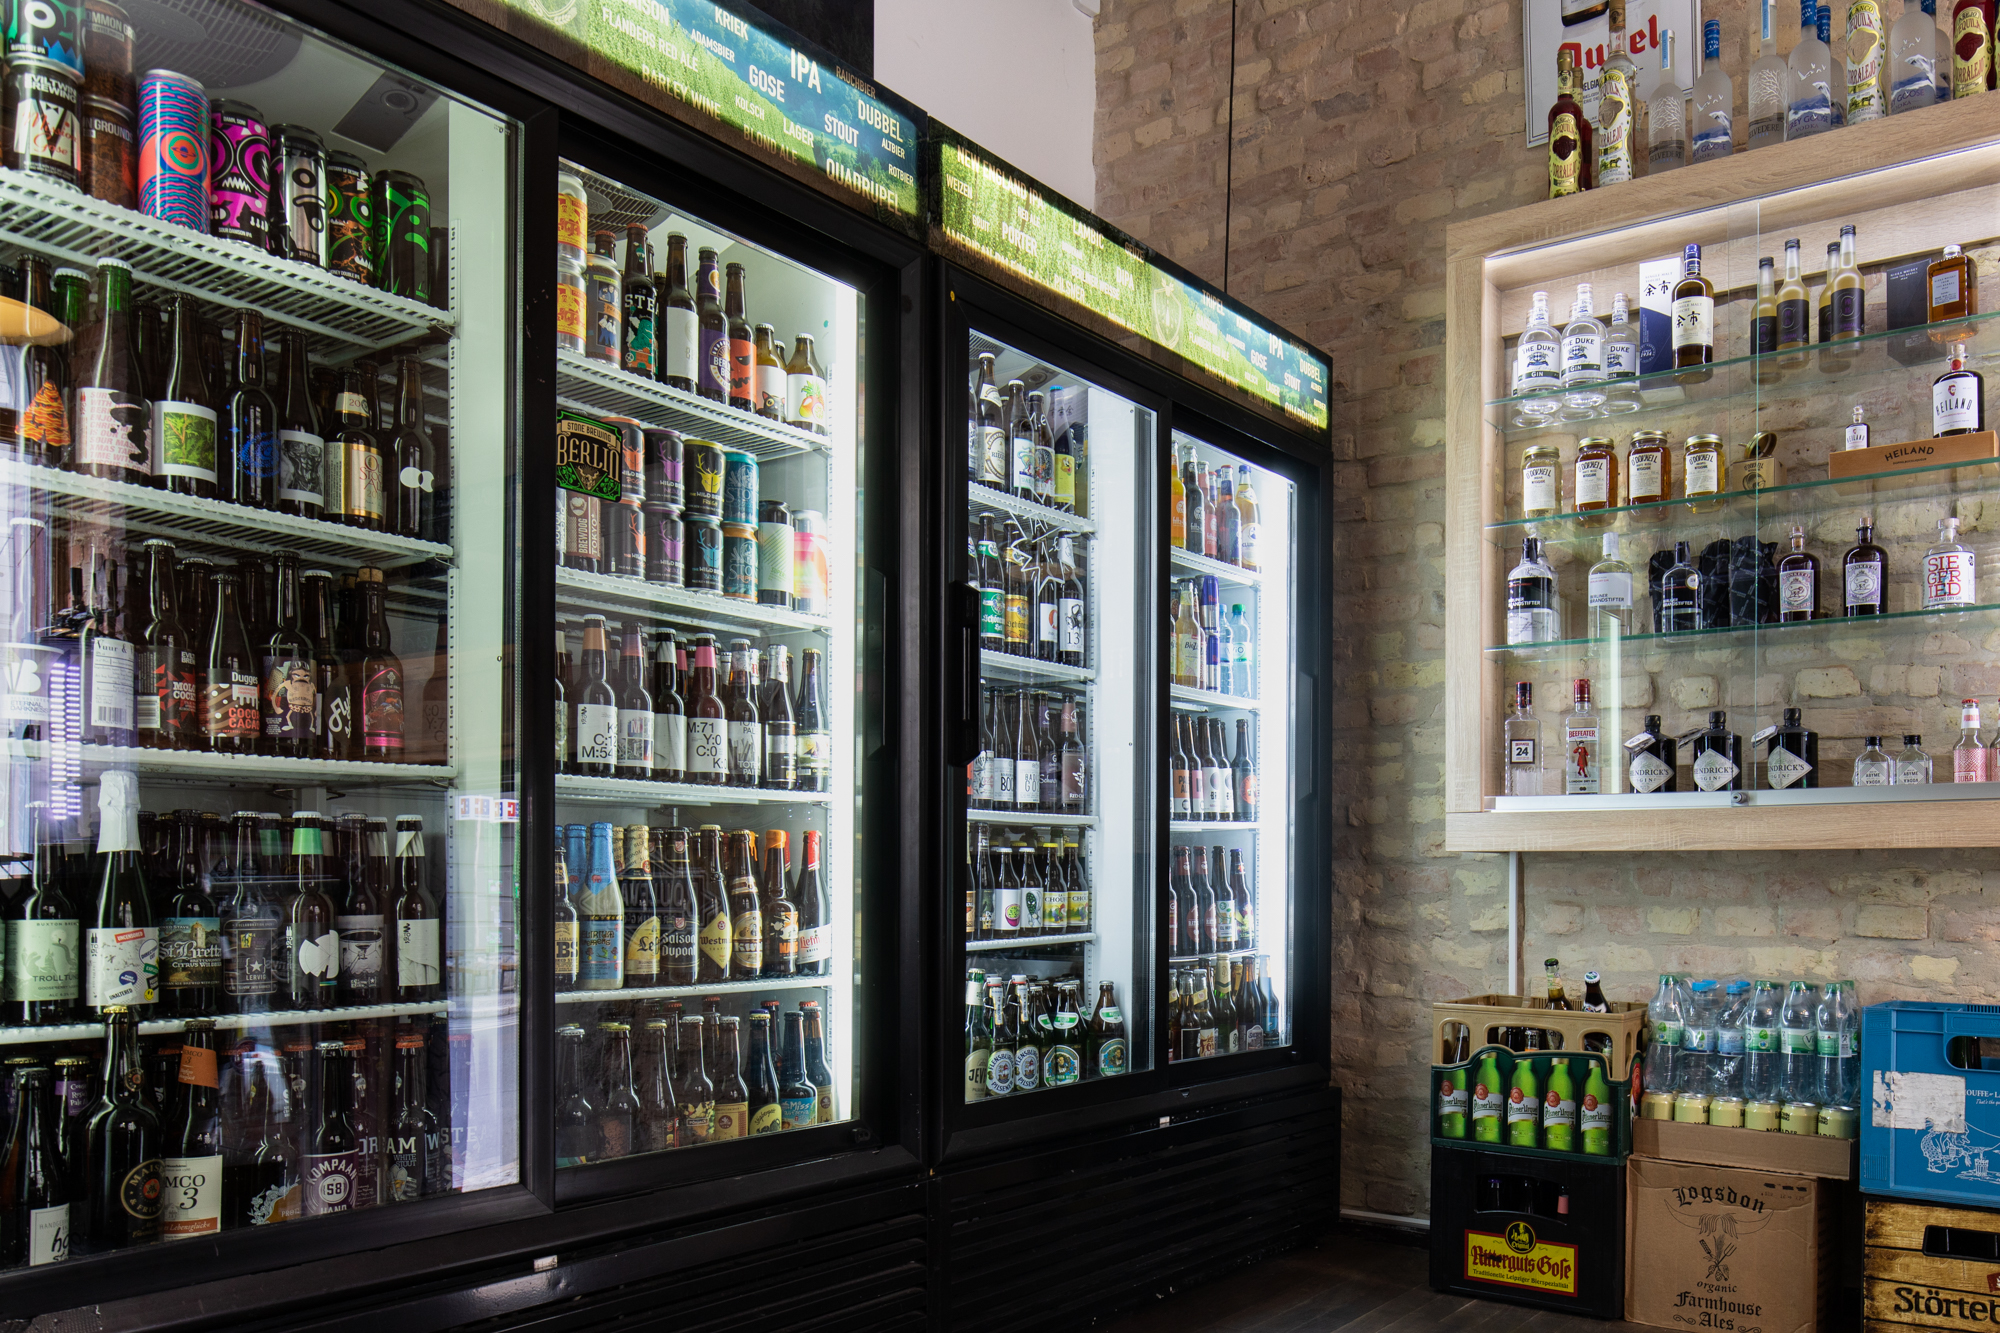 Biererei Store Craft Beer Bottle Shop And Aladdin S Cave